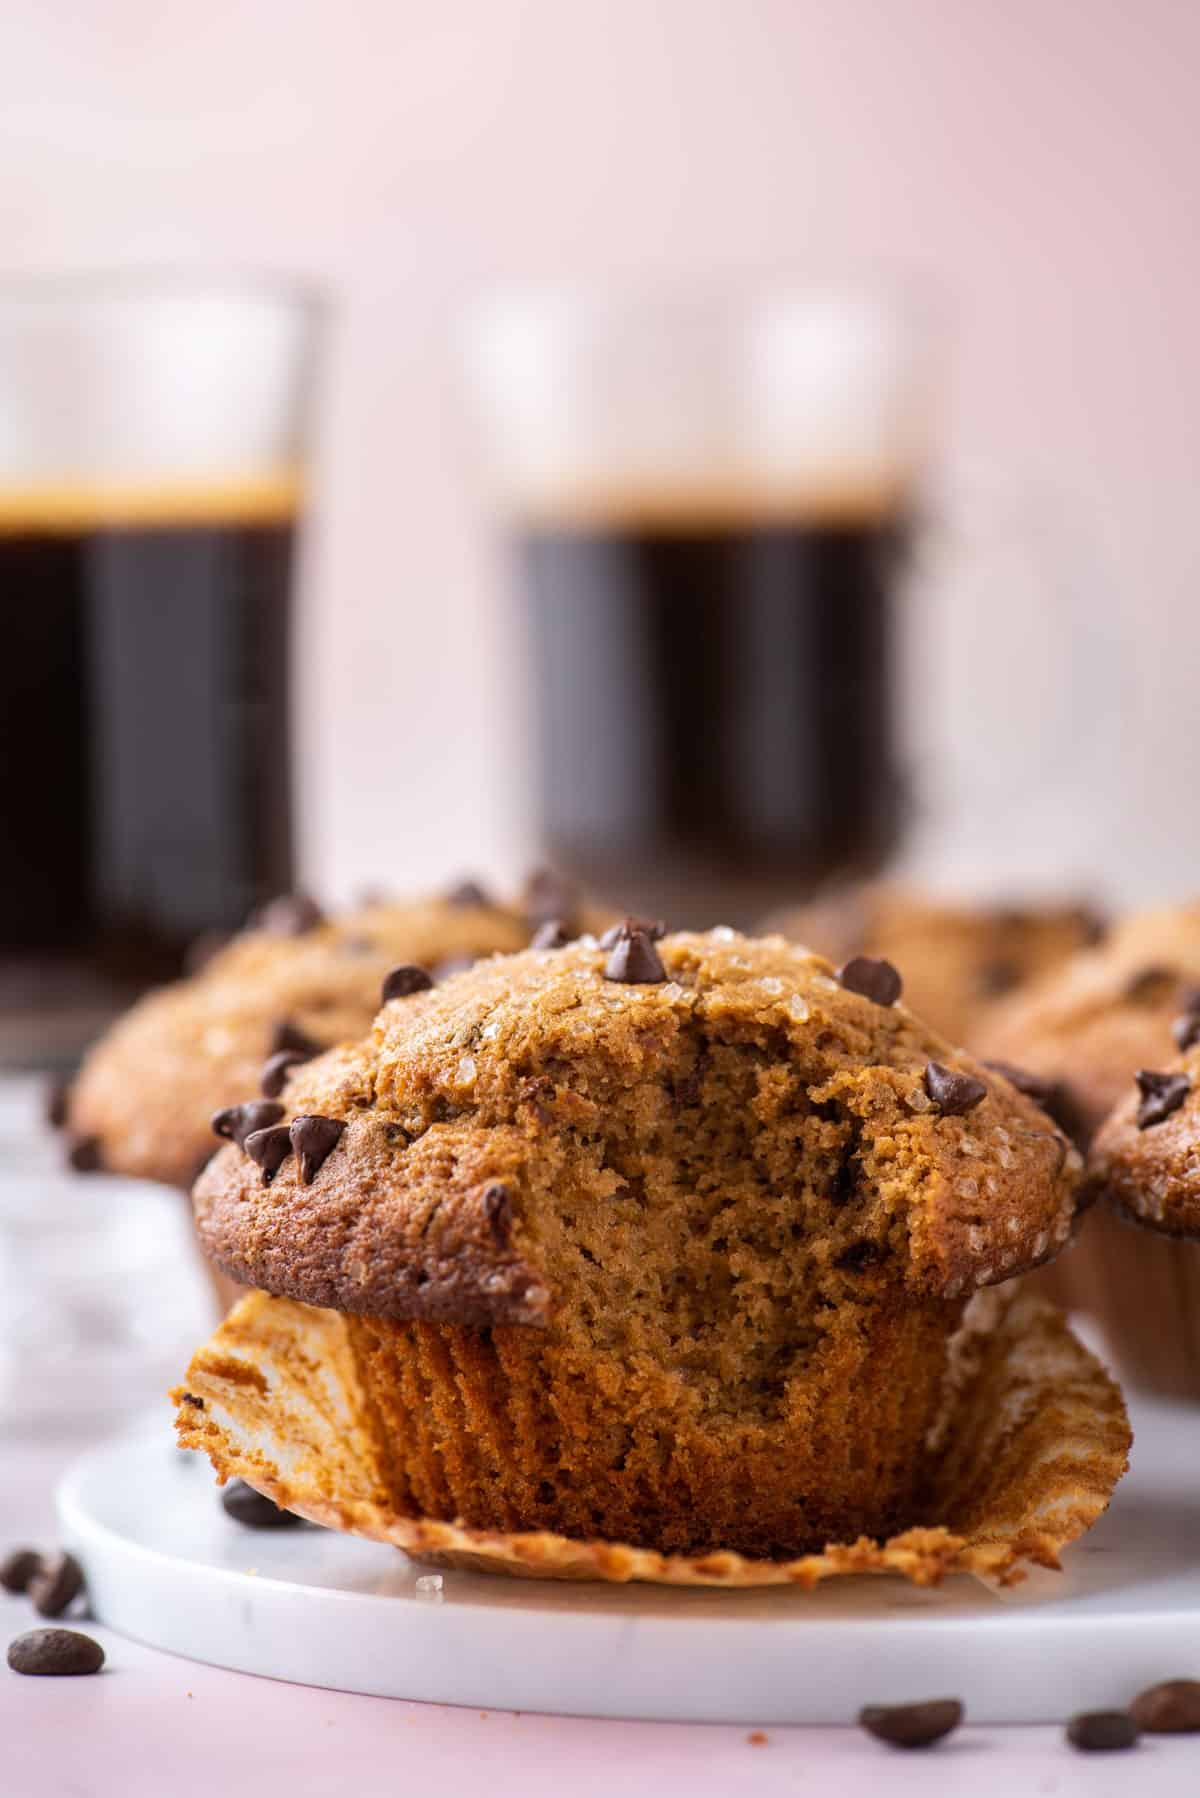 a cappuccino chip muffin on a white plate with a bite taken out, sitting in its open muffin liner, with coffee beans sprinkled around, more muffins and two cups of coffee in the background